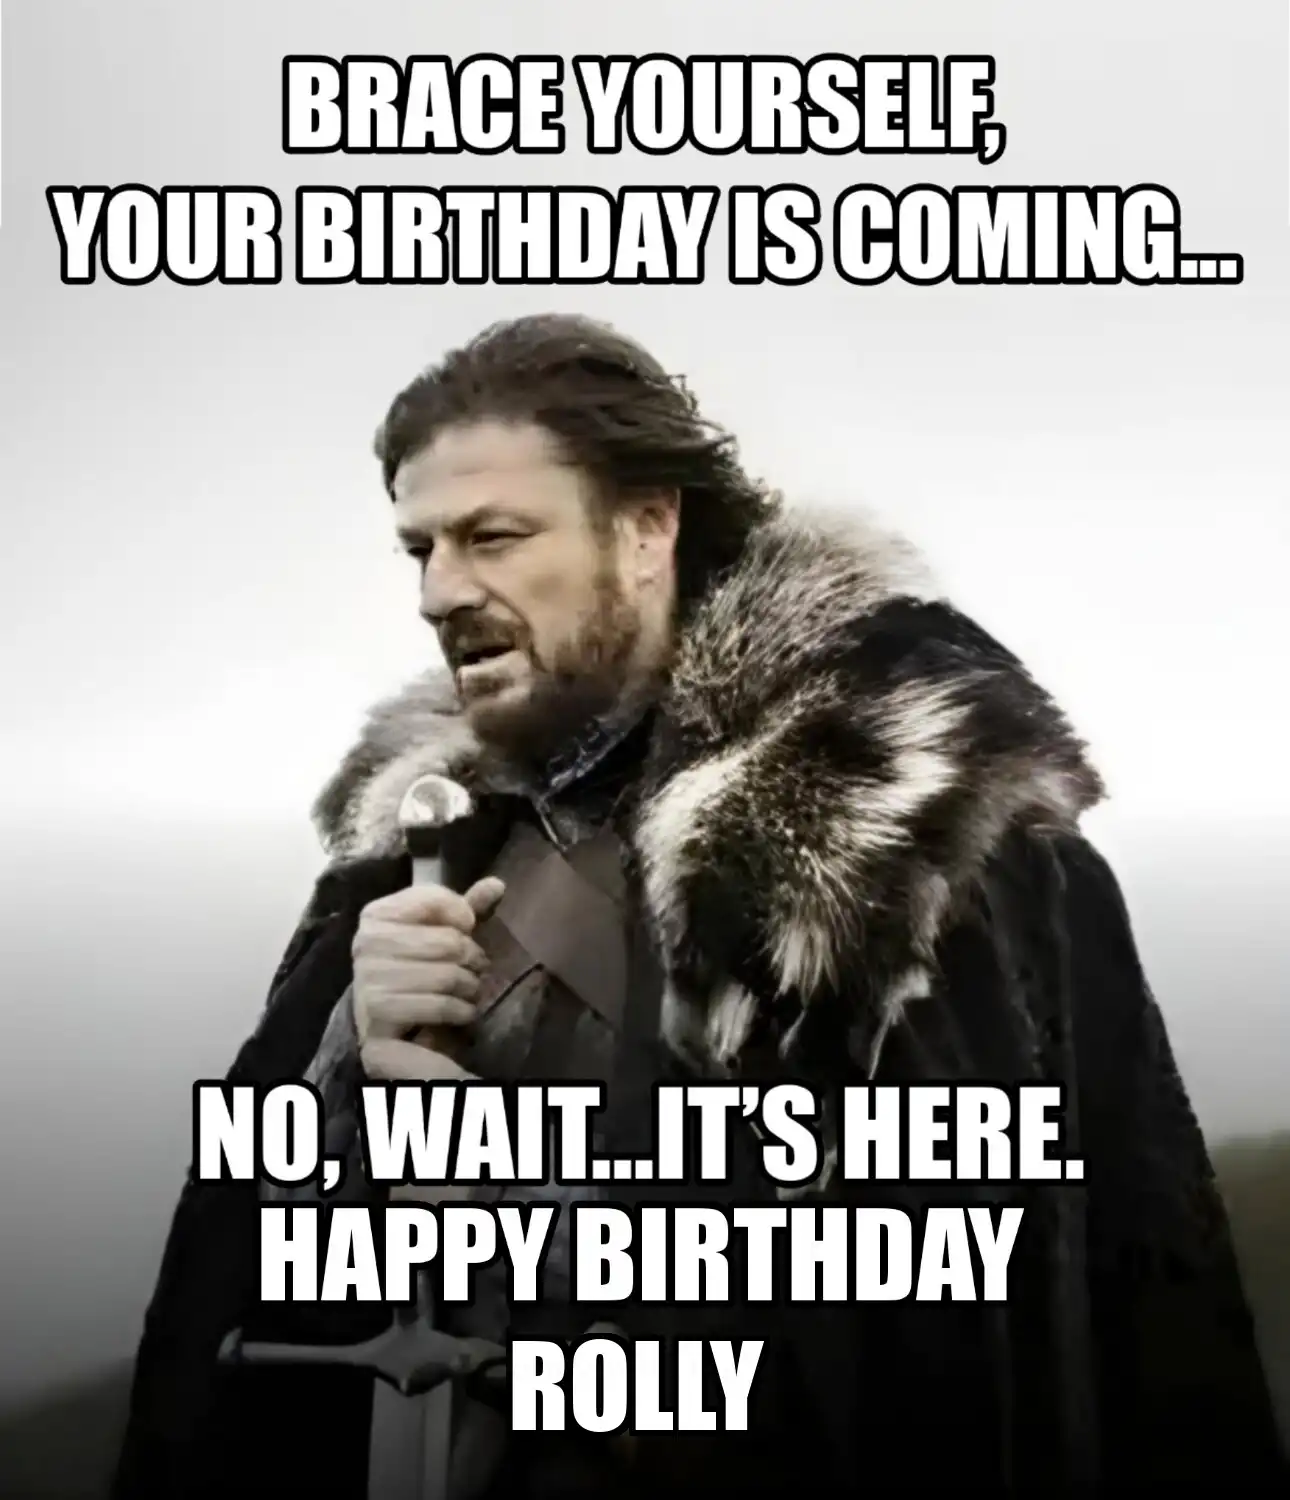 Happy Birthday Rolly Brace Yourself Your Birthday Is Coming Meme